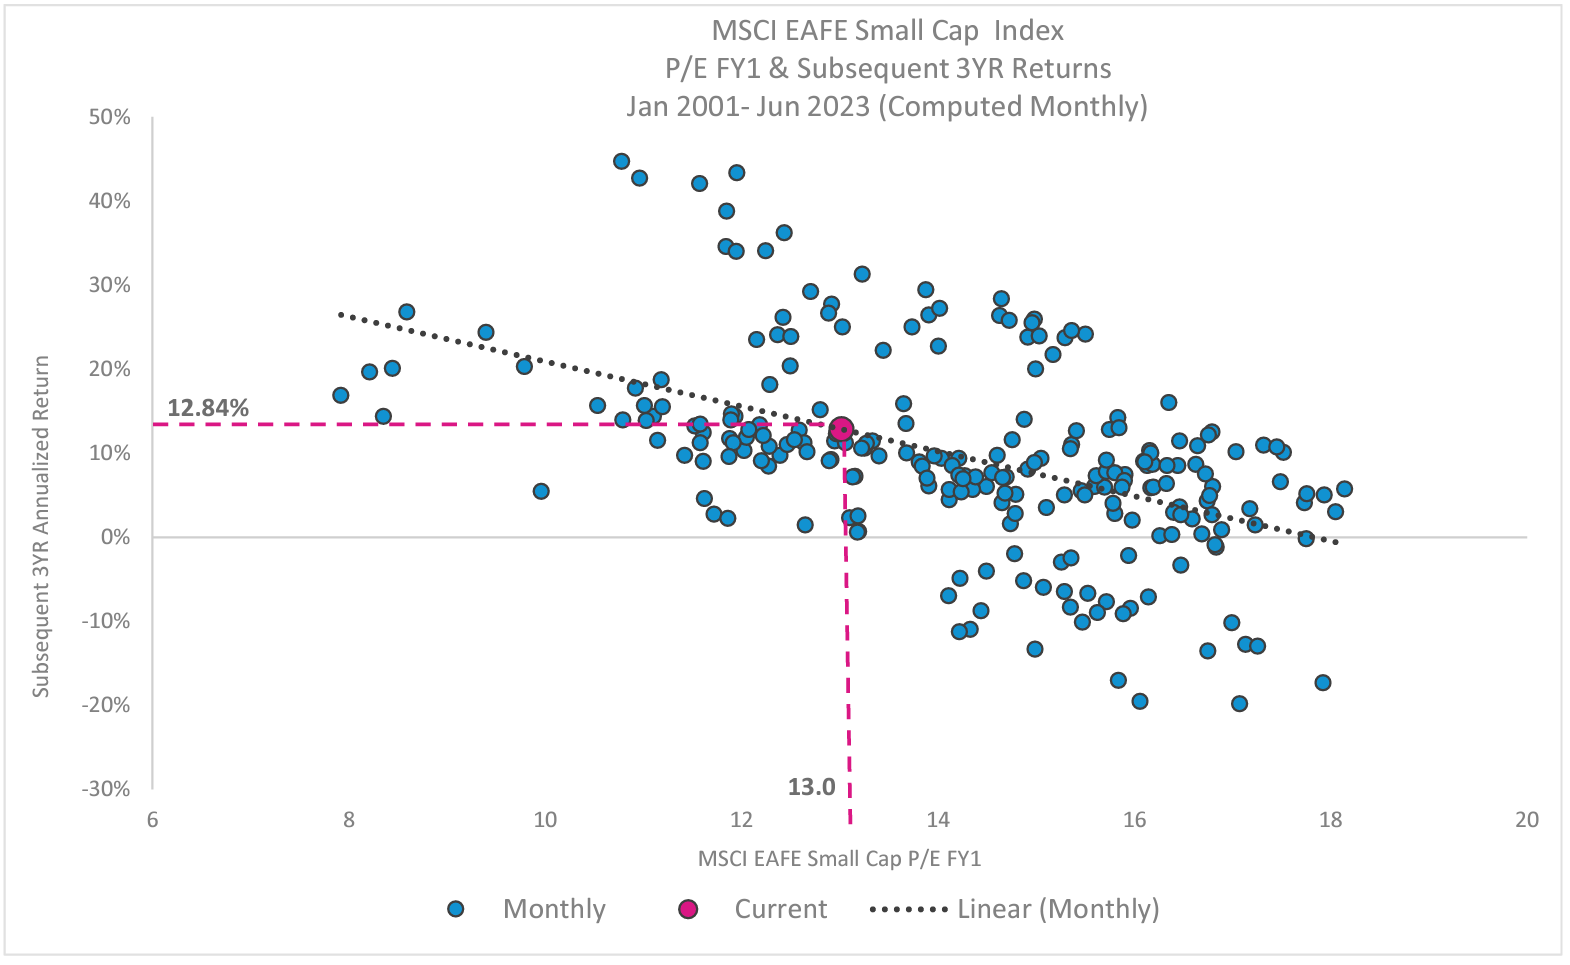 MSCI EAFE Small Cap Index P/E FY1 & Subsequent 3YR Returns Jan 2001 - Jun 2023 (Computed Monthly)